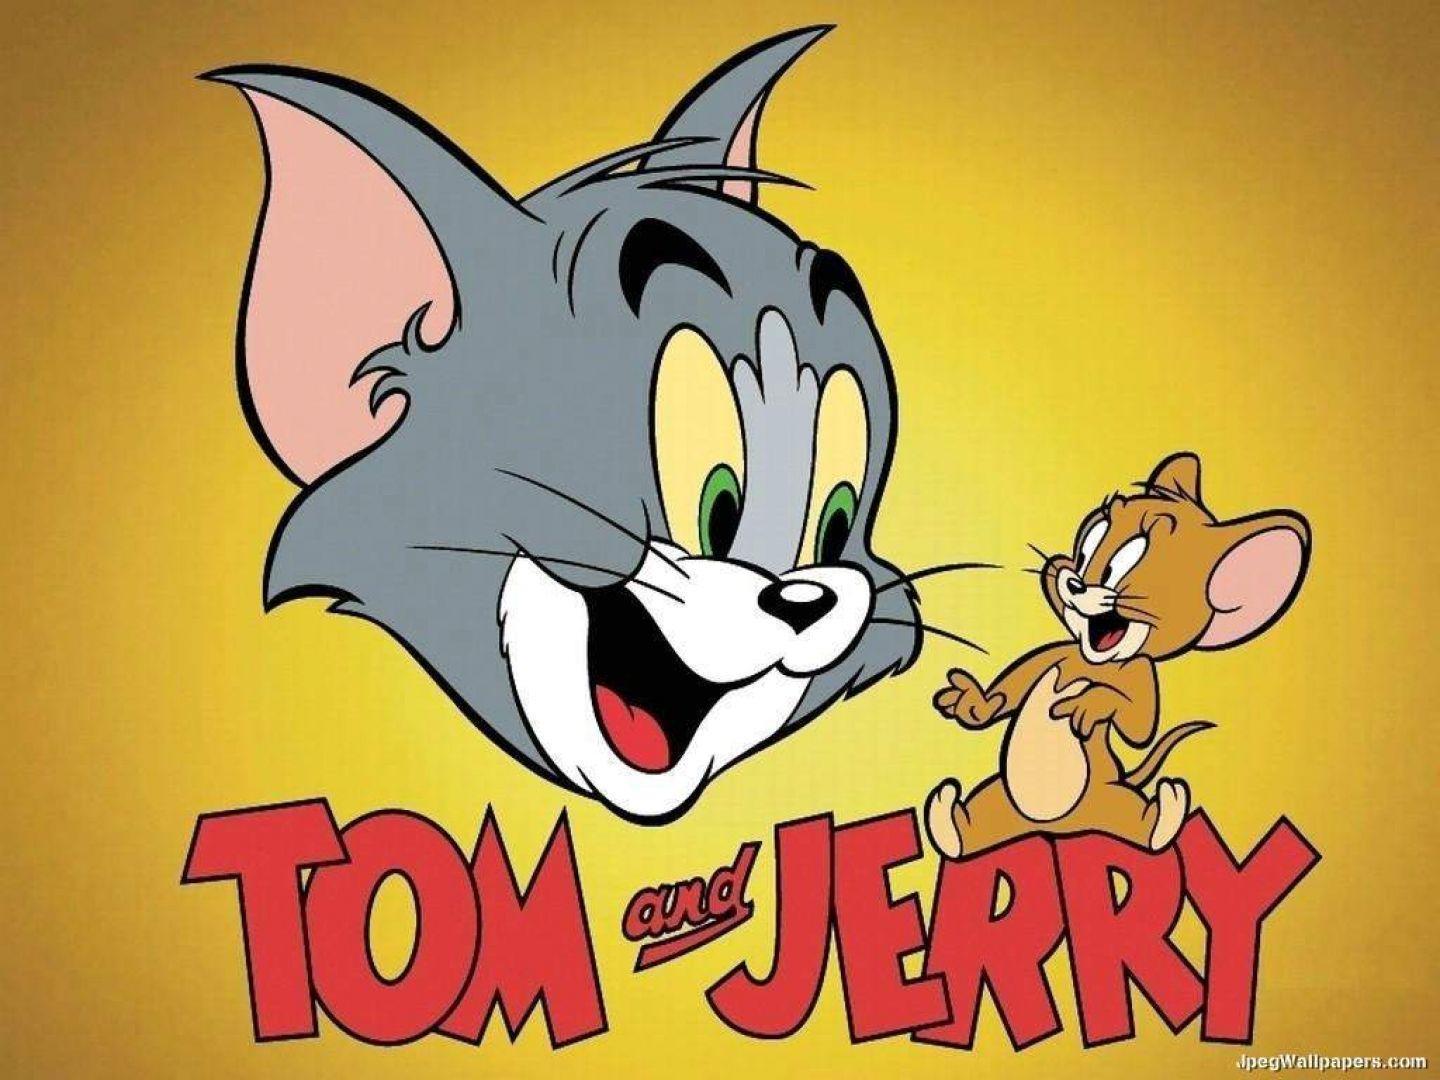 Love Wallpaper Tom And Jerry Image